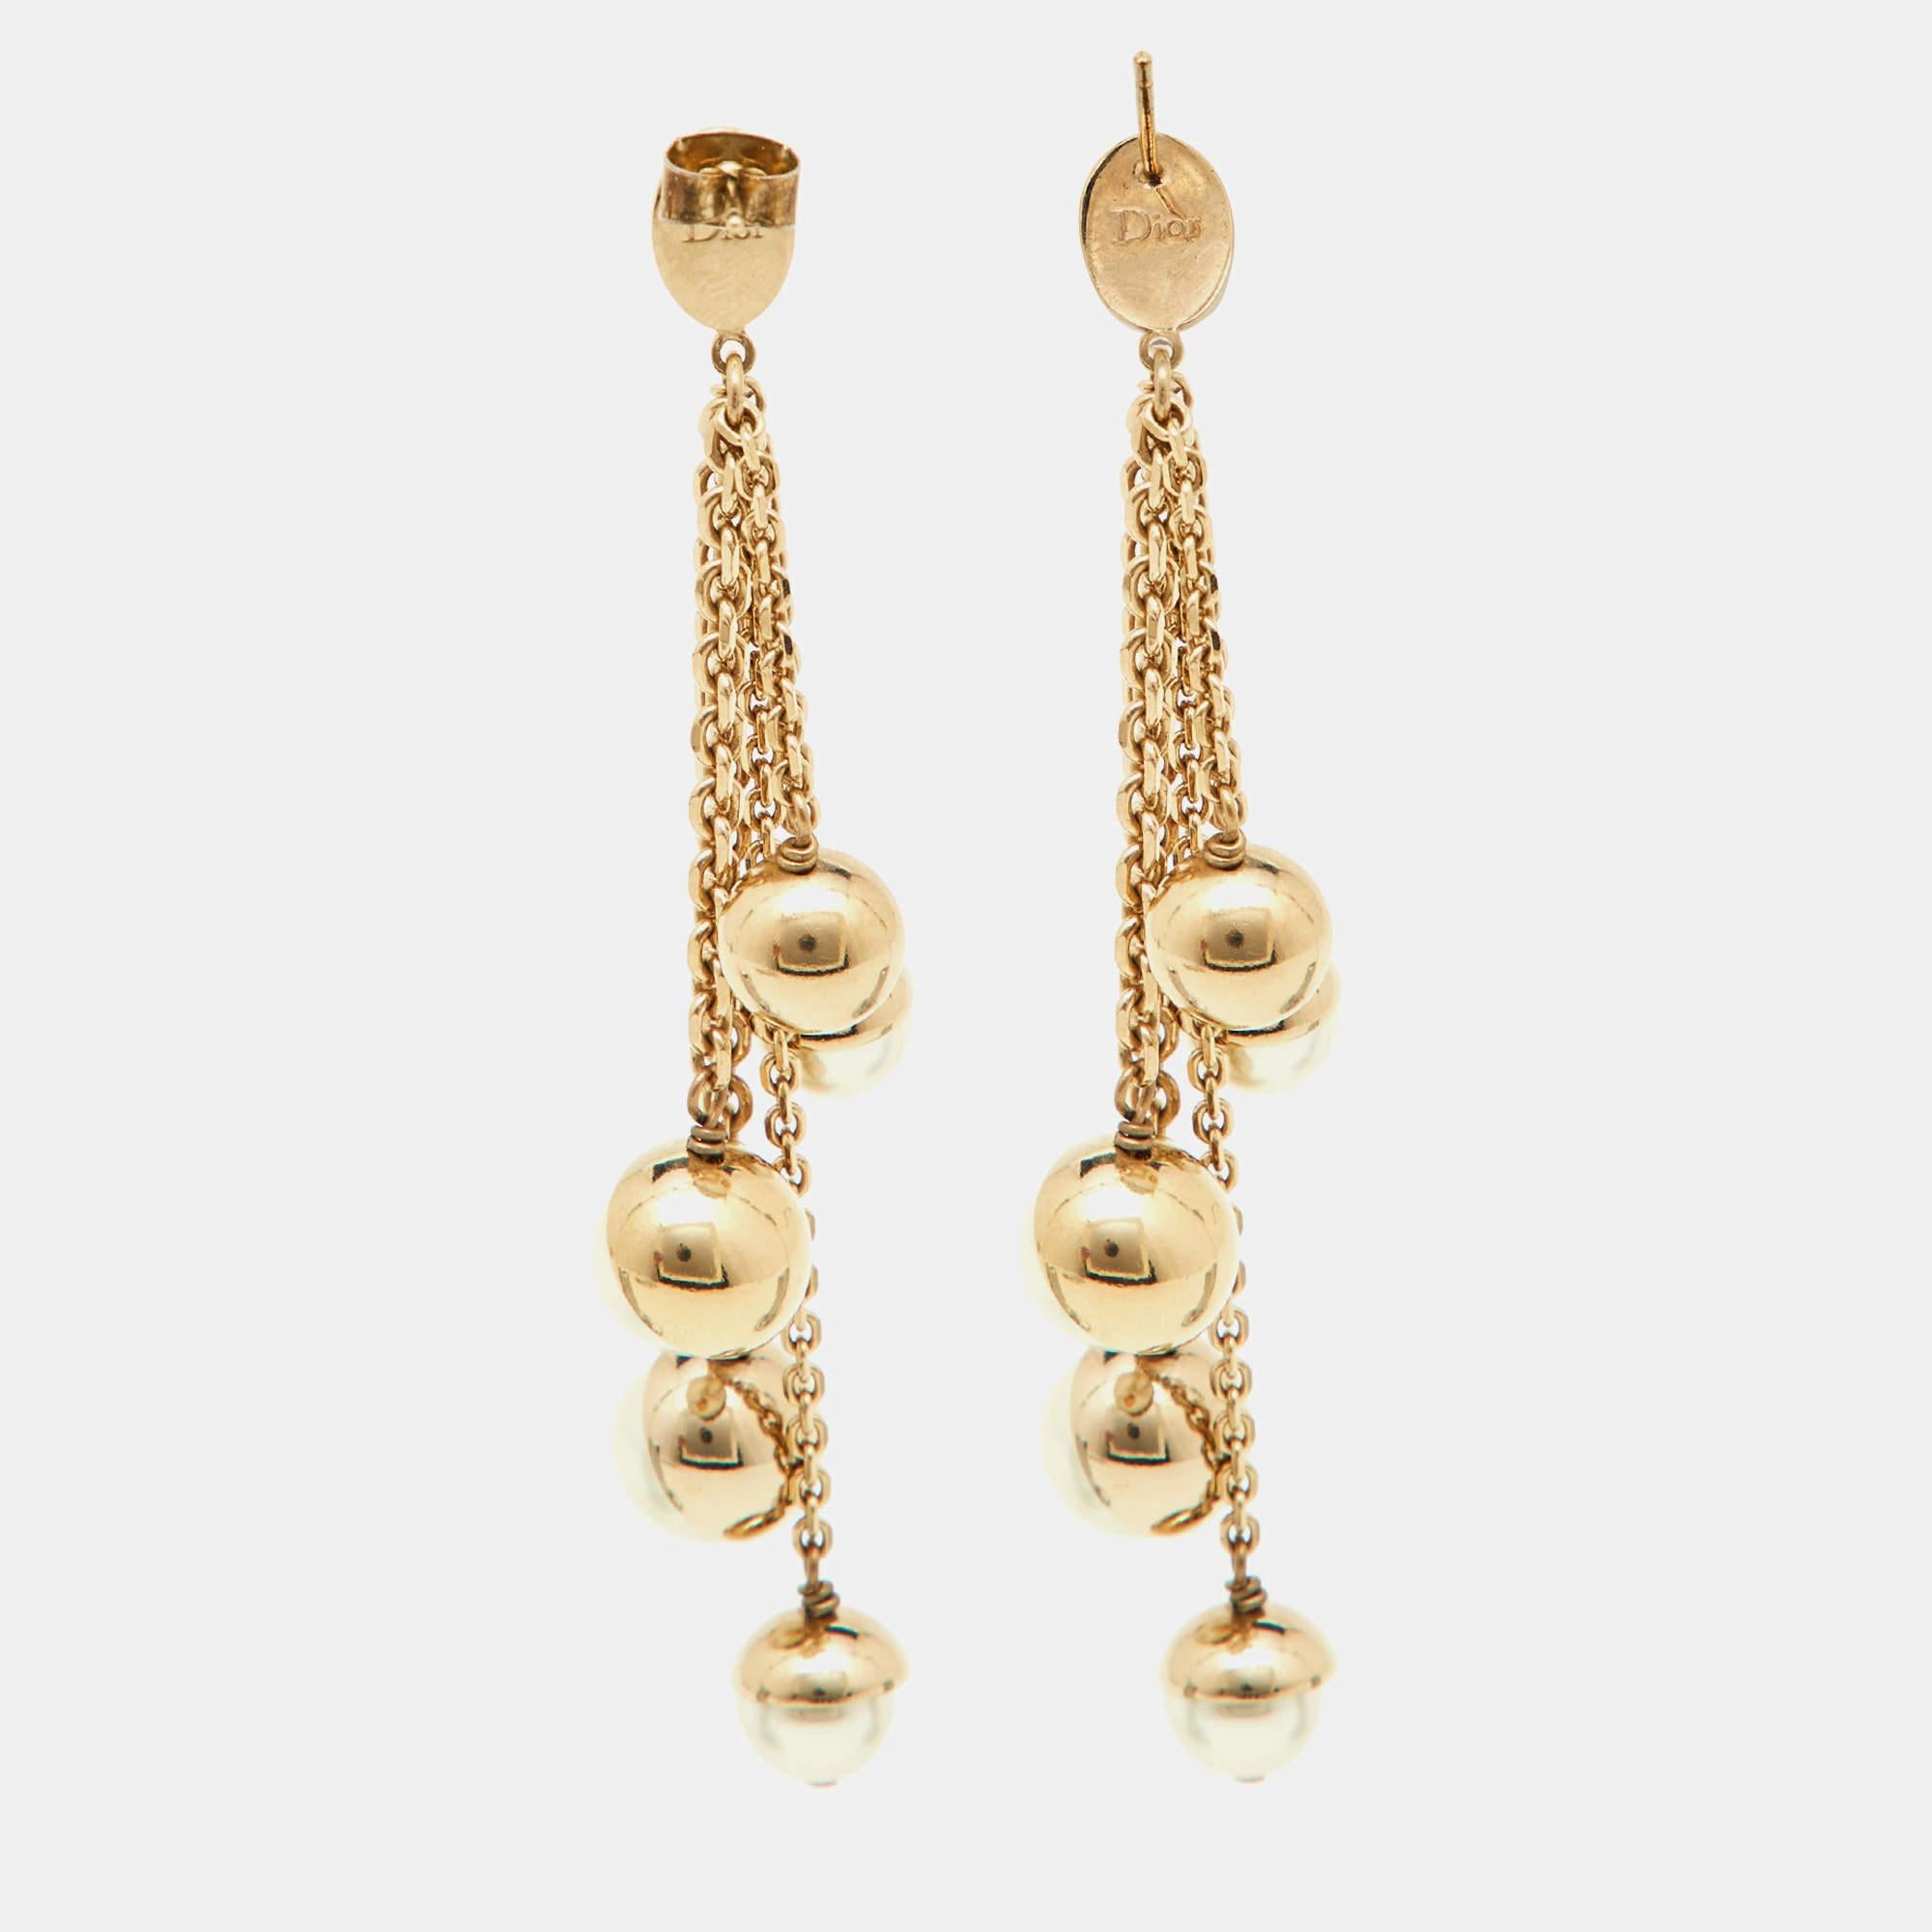 This pair of Dior drop earrings is an accessory you would go to season after season. Made of gold-tone metal with faux pearl tips, this one's a worthy investment.

